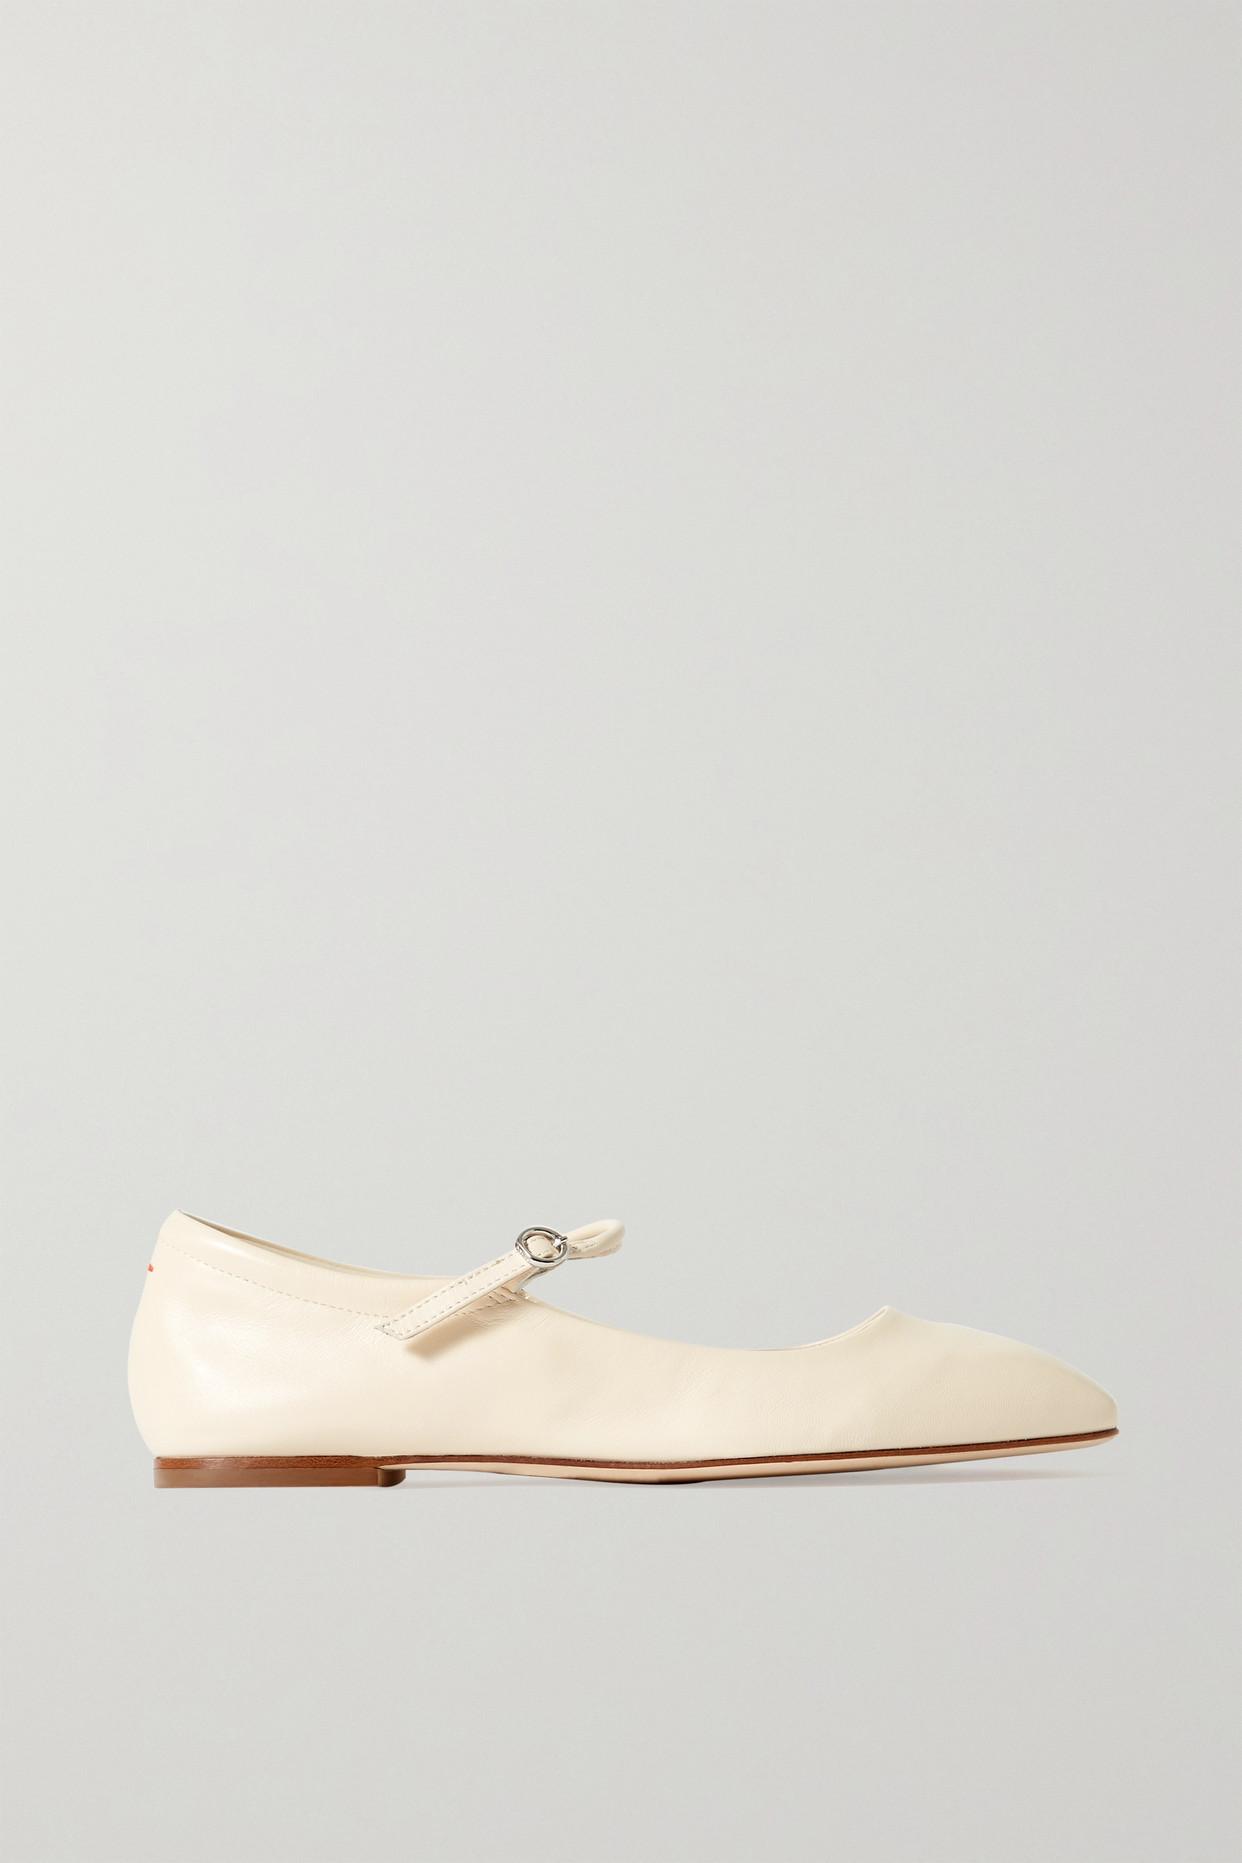 Aeyde Uma Leather Mary Jane Ballet Flats in Natural | Lyst